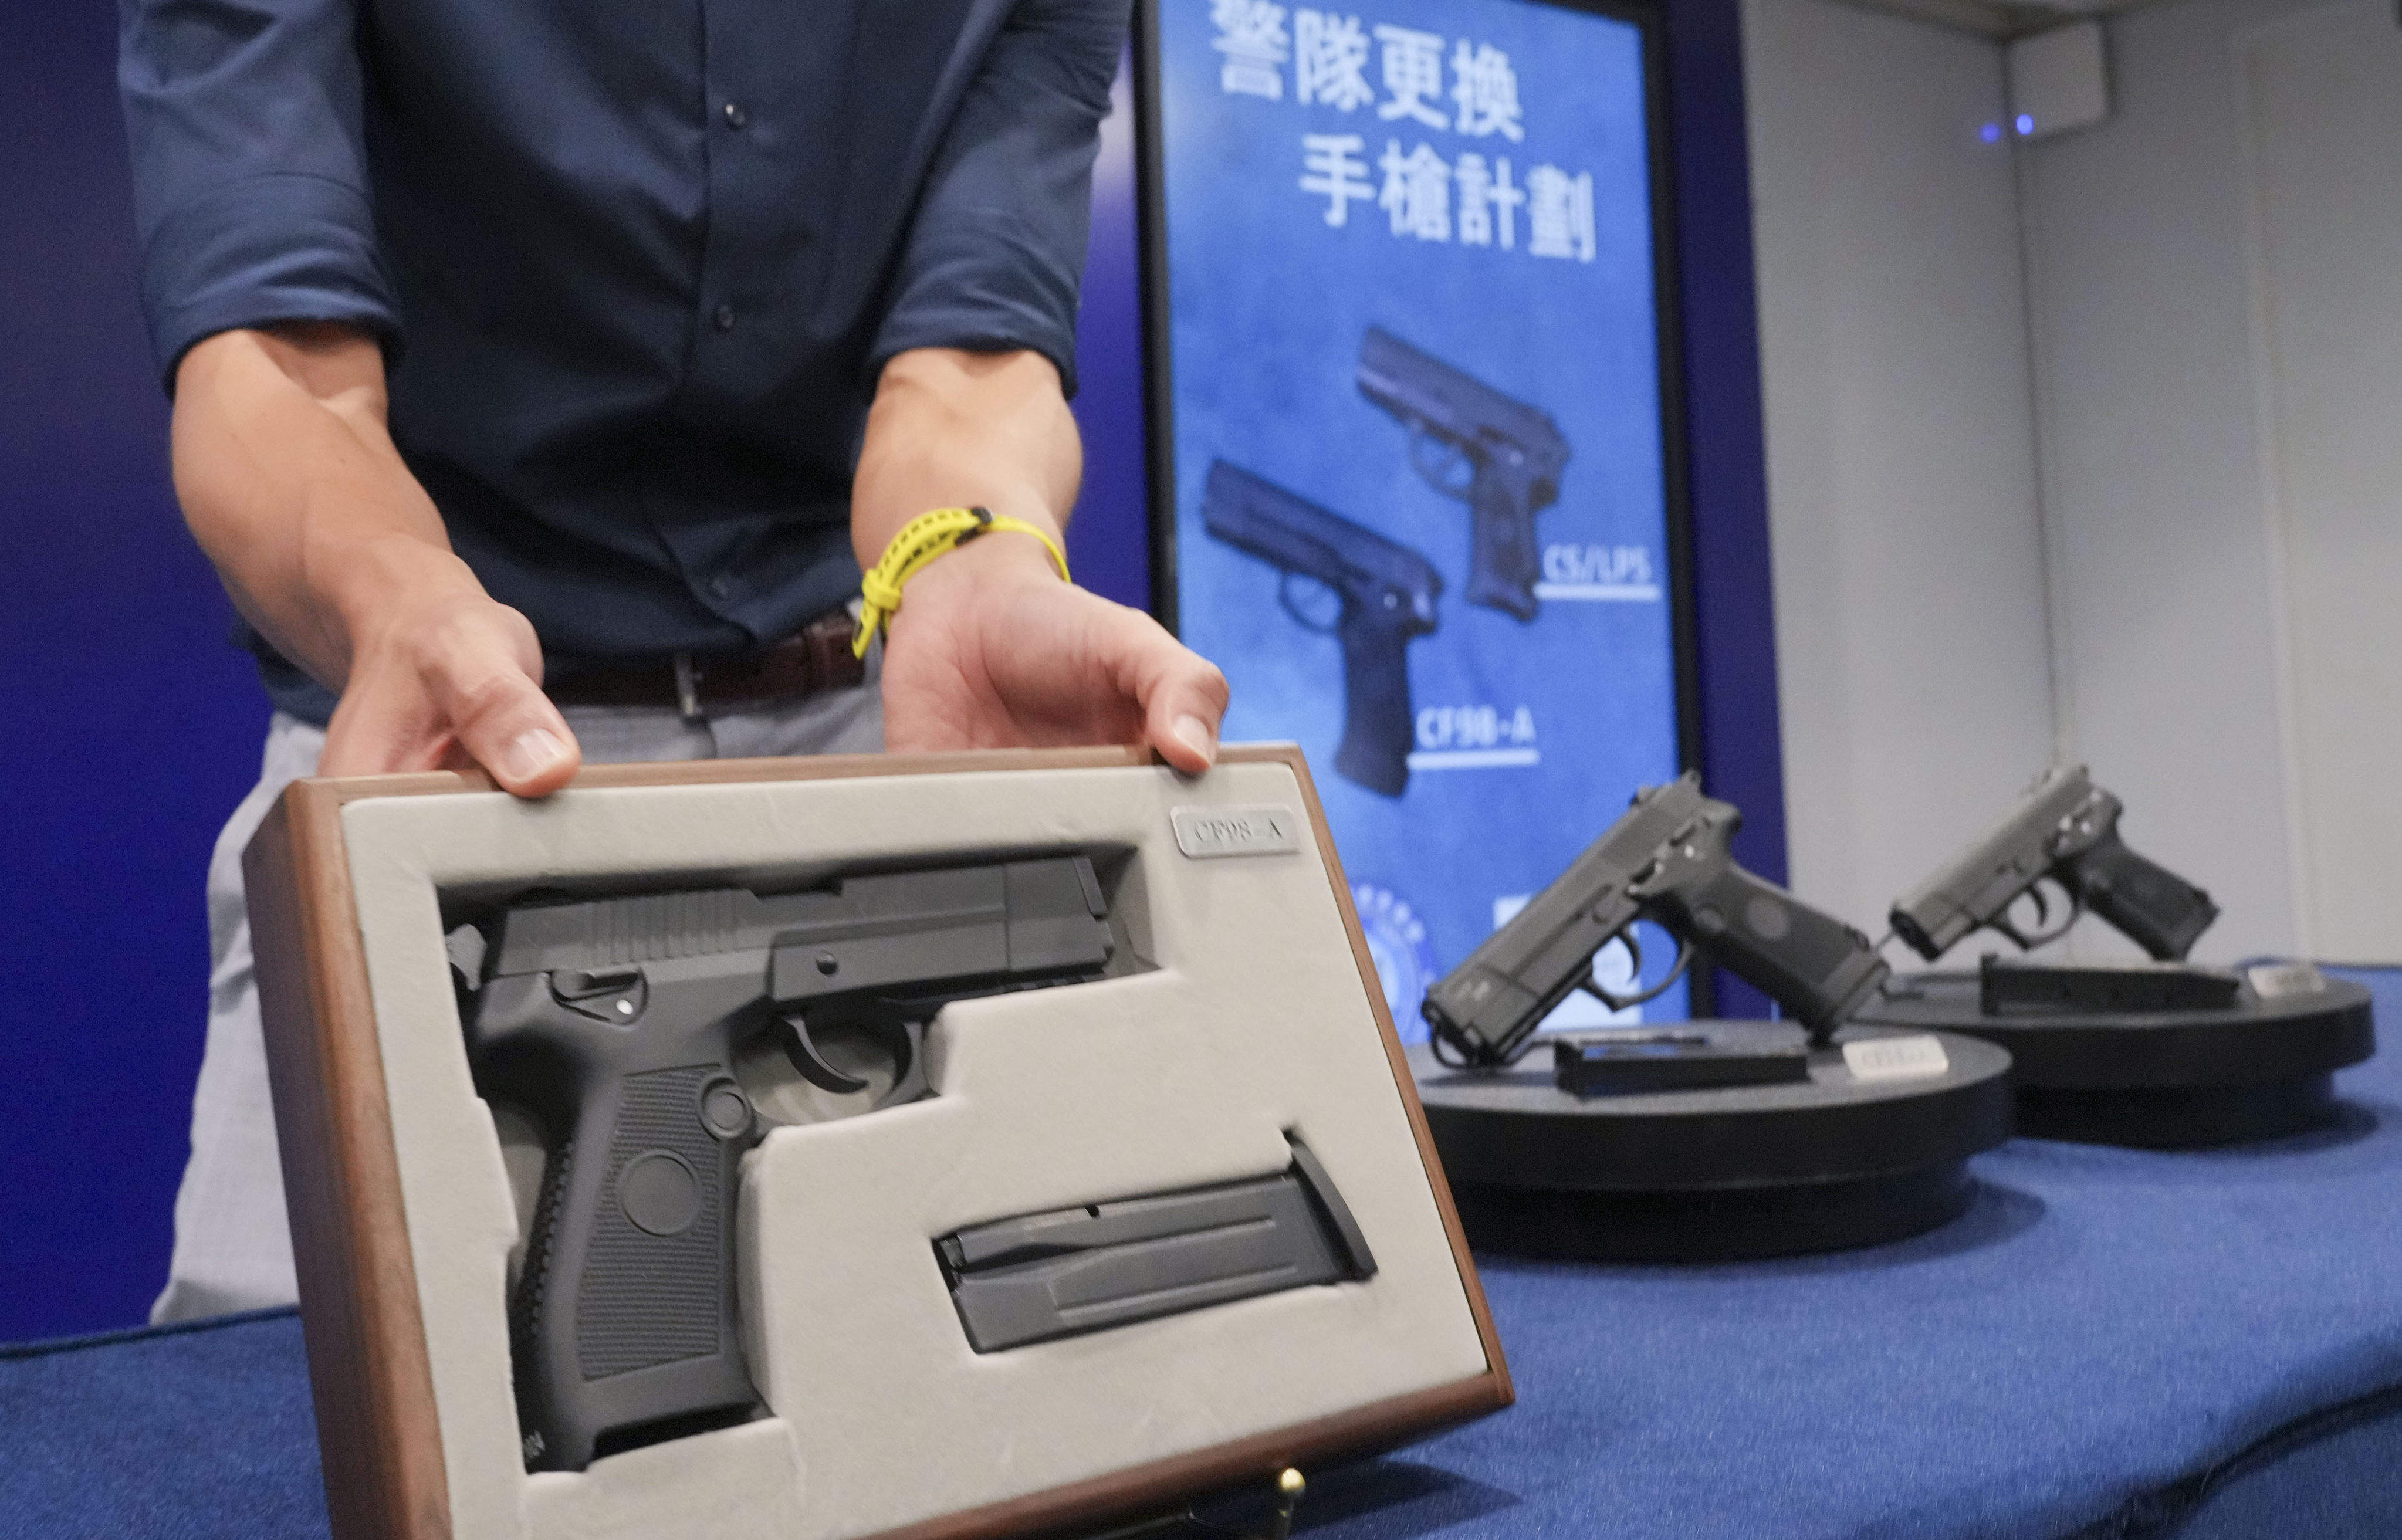 The 9mm CF98-A pistols (left) with a 15-round capacity are displayed at a press conference at police headquarters in Wan Chai. Photo: May Tse